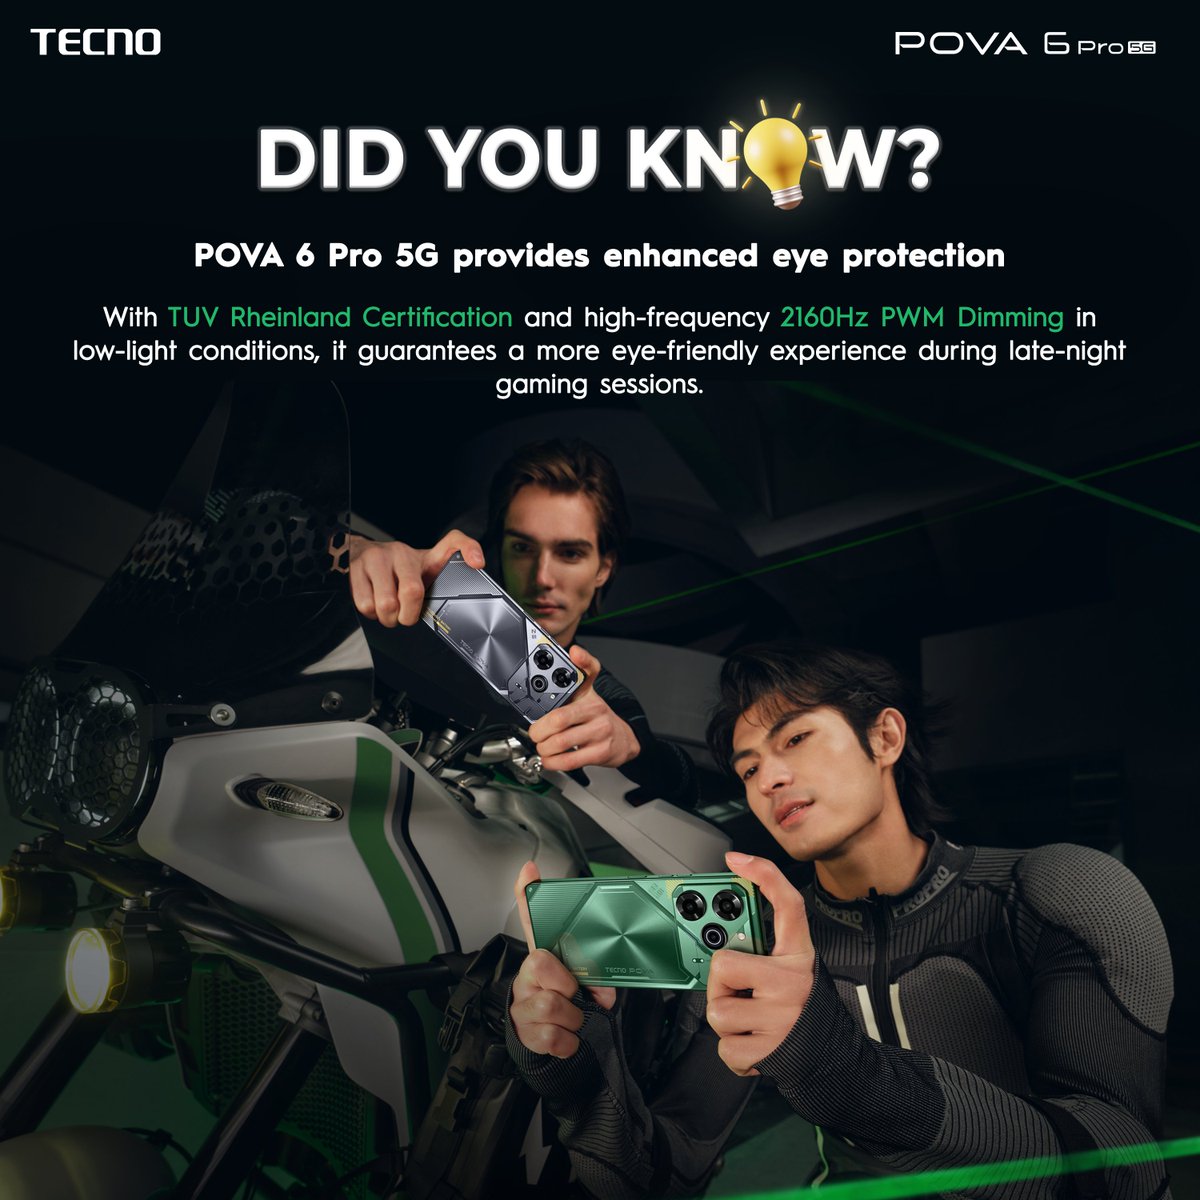 Enjoy a more eye-friendly gaming experience with the TECNO #POVA6Pro5G, which features TUV Rheinland Certification and high-frequency 2160Hz PWM Dimming in low-light conditions.

Buy now for only P11,999!

#TECNOPOVA6Pro5G #TECNOPOVA6Series #LimitlessPerformance #TECNOPhilippines